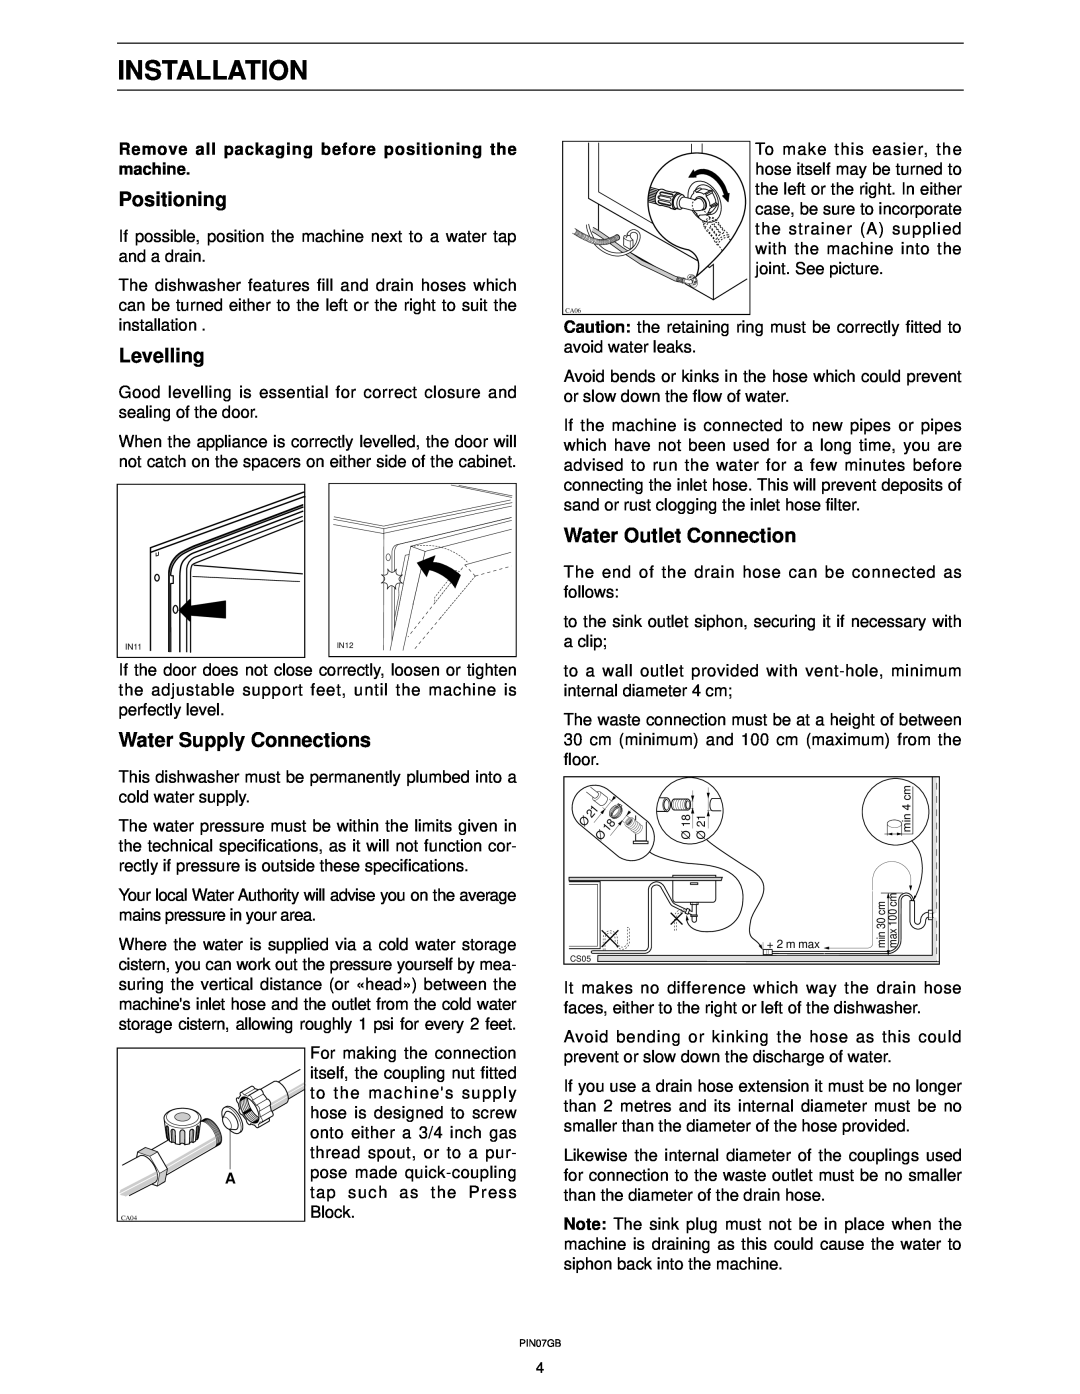 Zanussi ZT 617 manual Installation, Positioning, Levelling, Water Outlet Connection, Water Supply Connections 